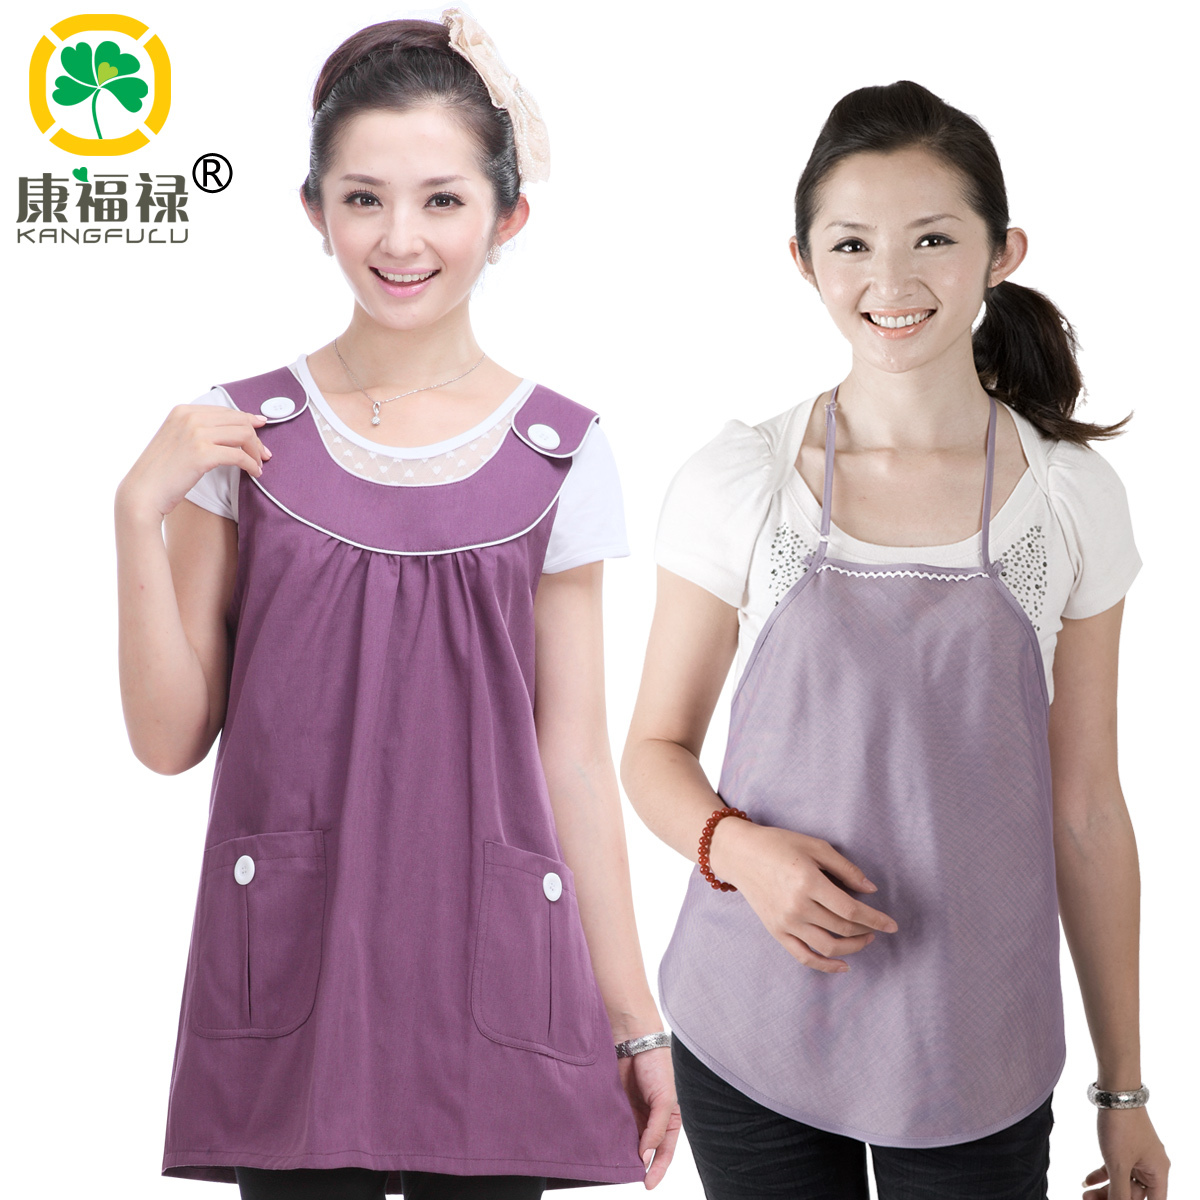 Radiation-resistant maternity clothing double layer silver fiber apron kfl804a